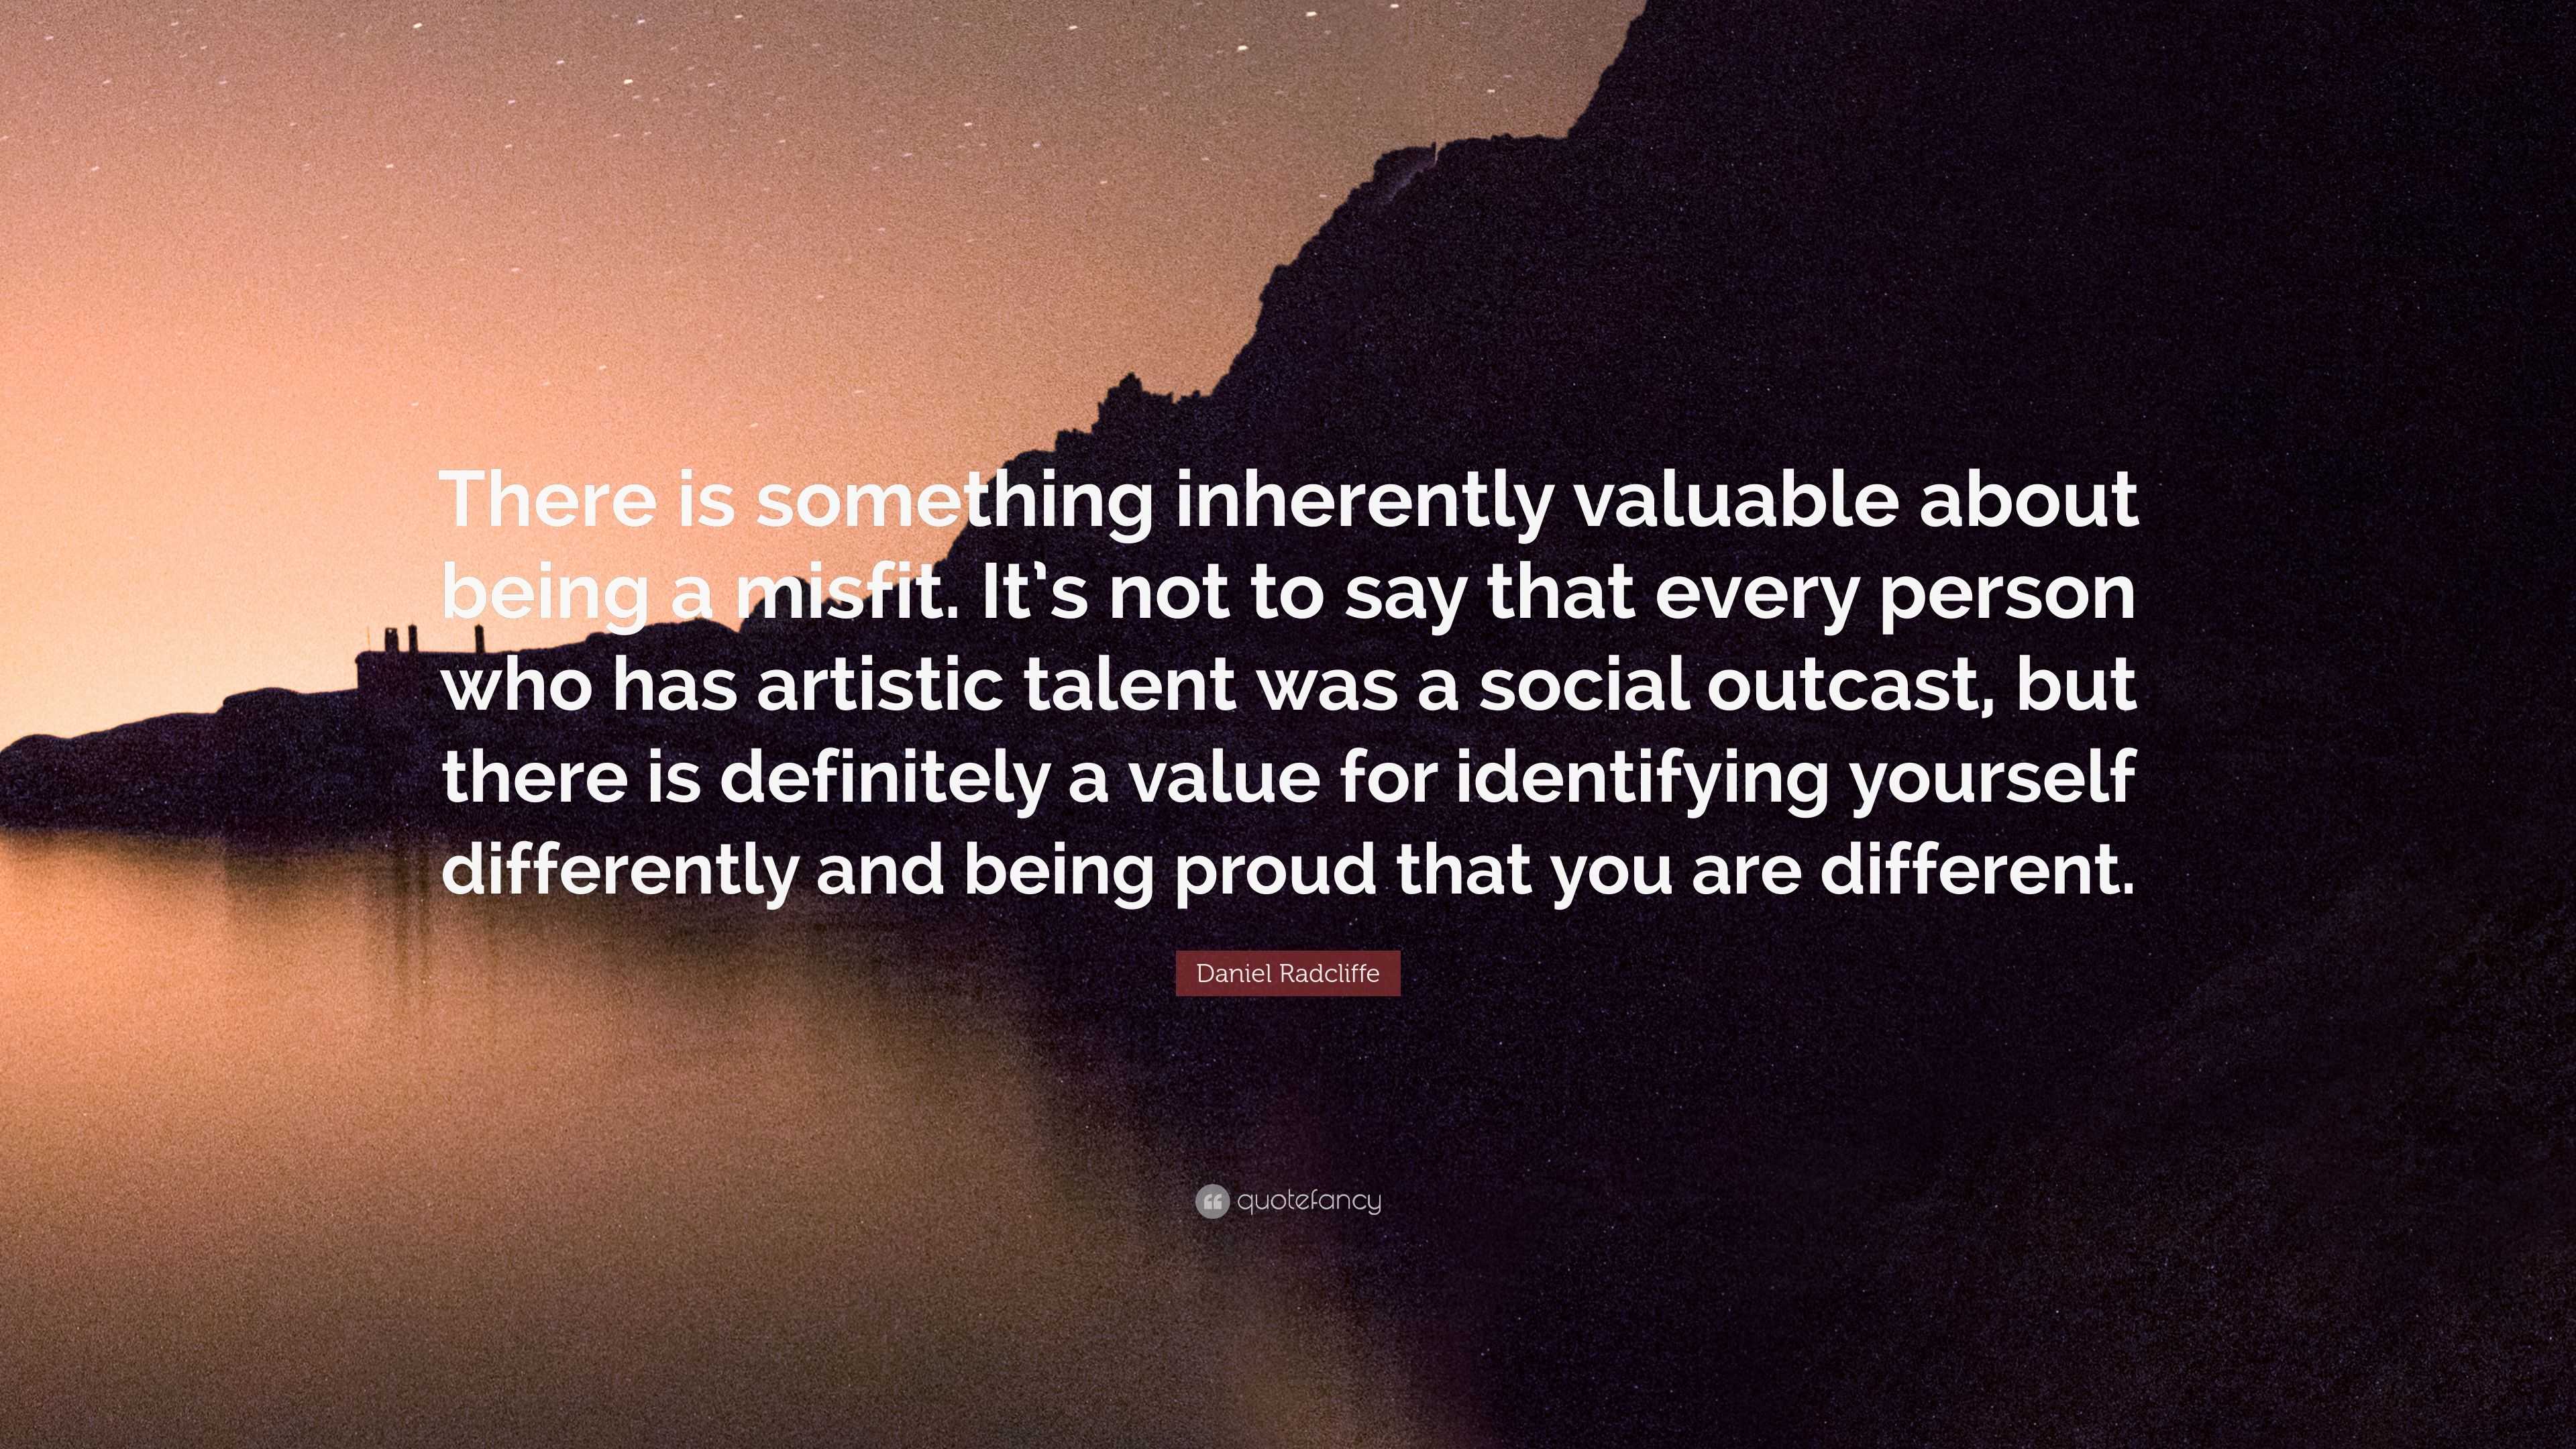 Daniel Radcliffe Quote: “There Is Something Inherently Valuable About Being A Misfit. It's Not To Say That Every Person Who Has Artistic Talent W...”